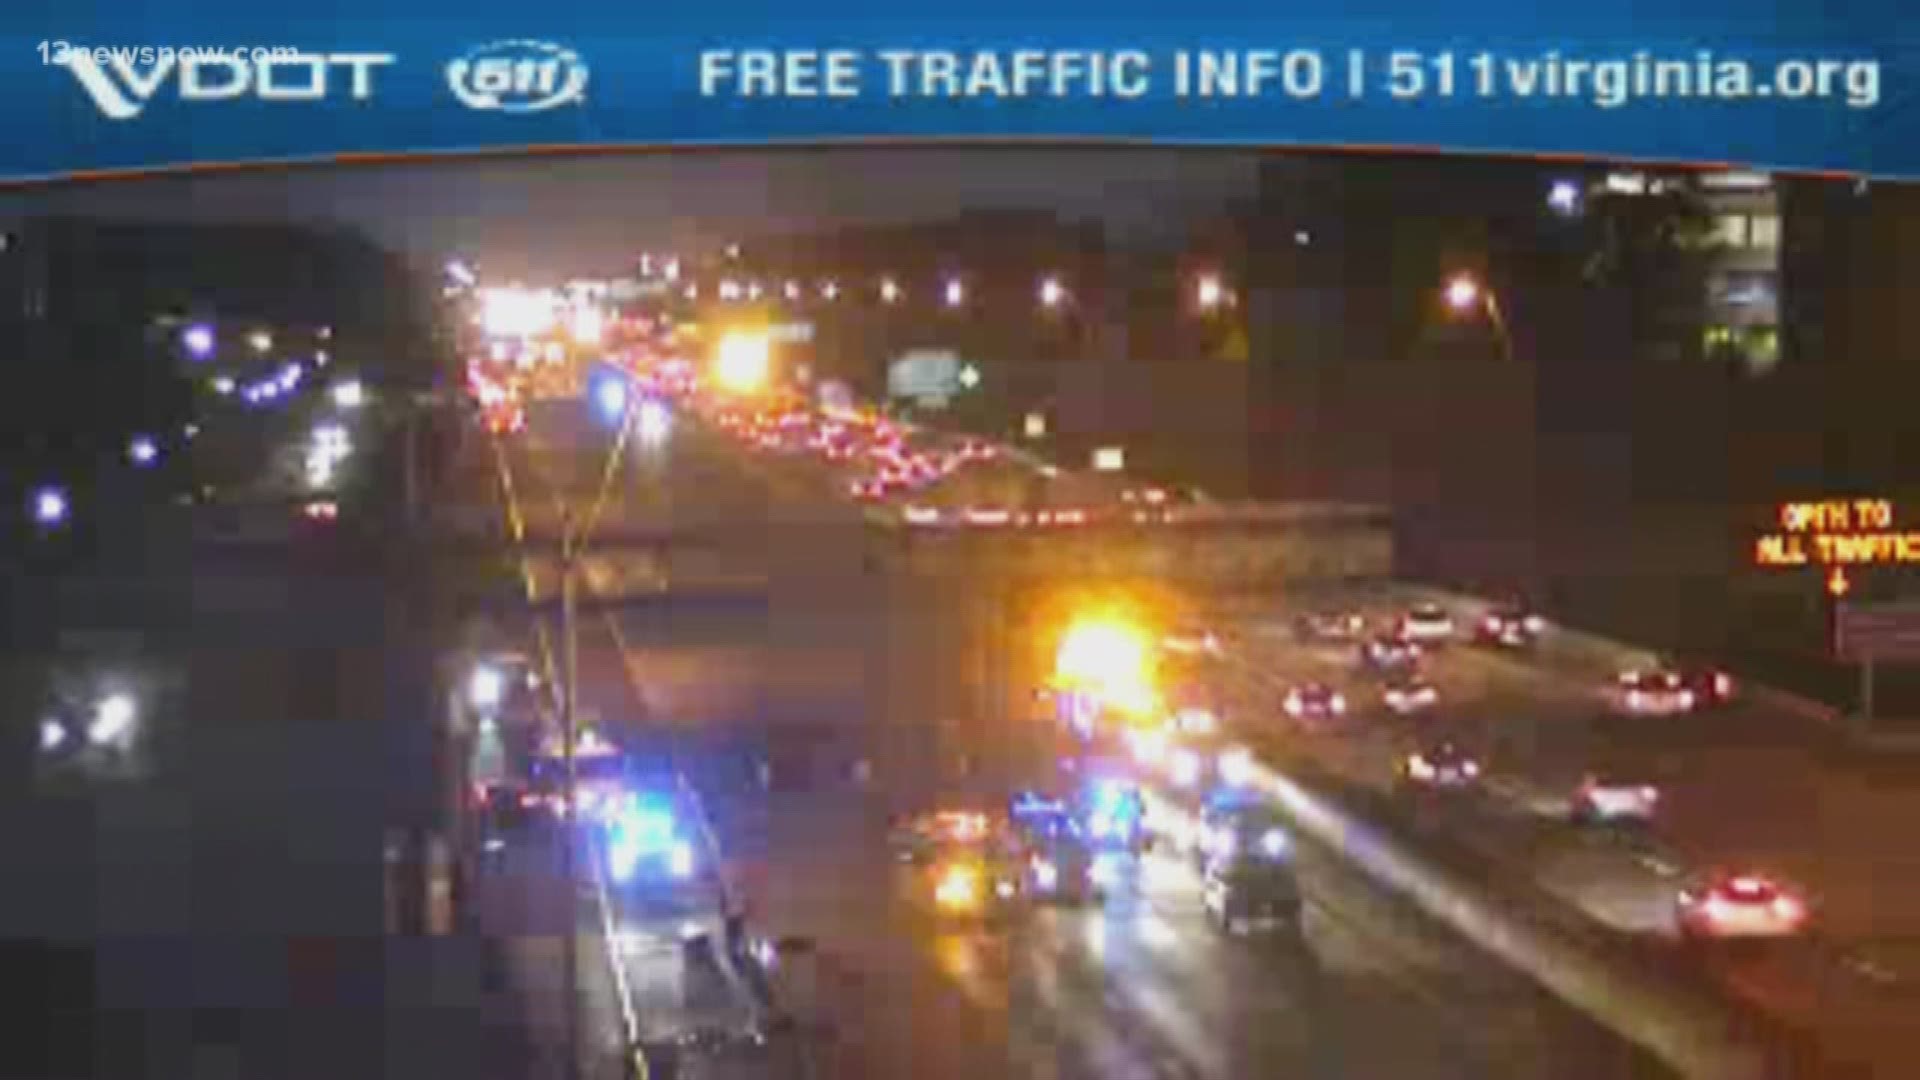 Virginia State Police said one person was killed in a three-vehicle crash on I-264 in Virginia Beach. The crash happened at Independence Boulevard.